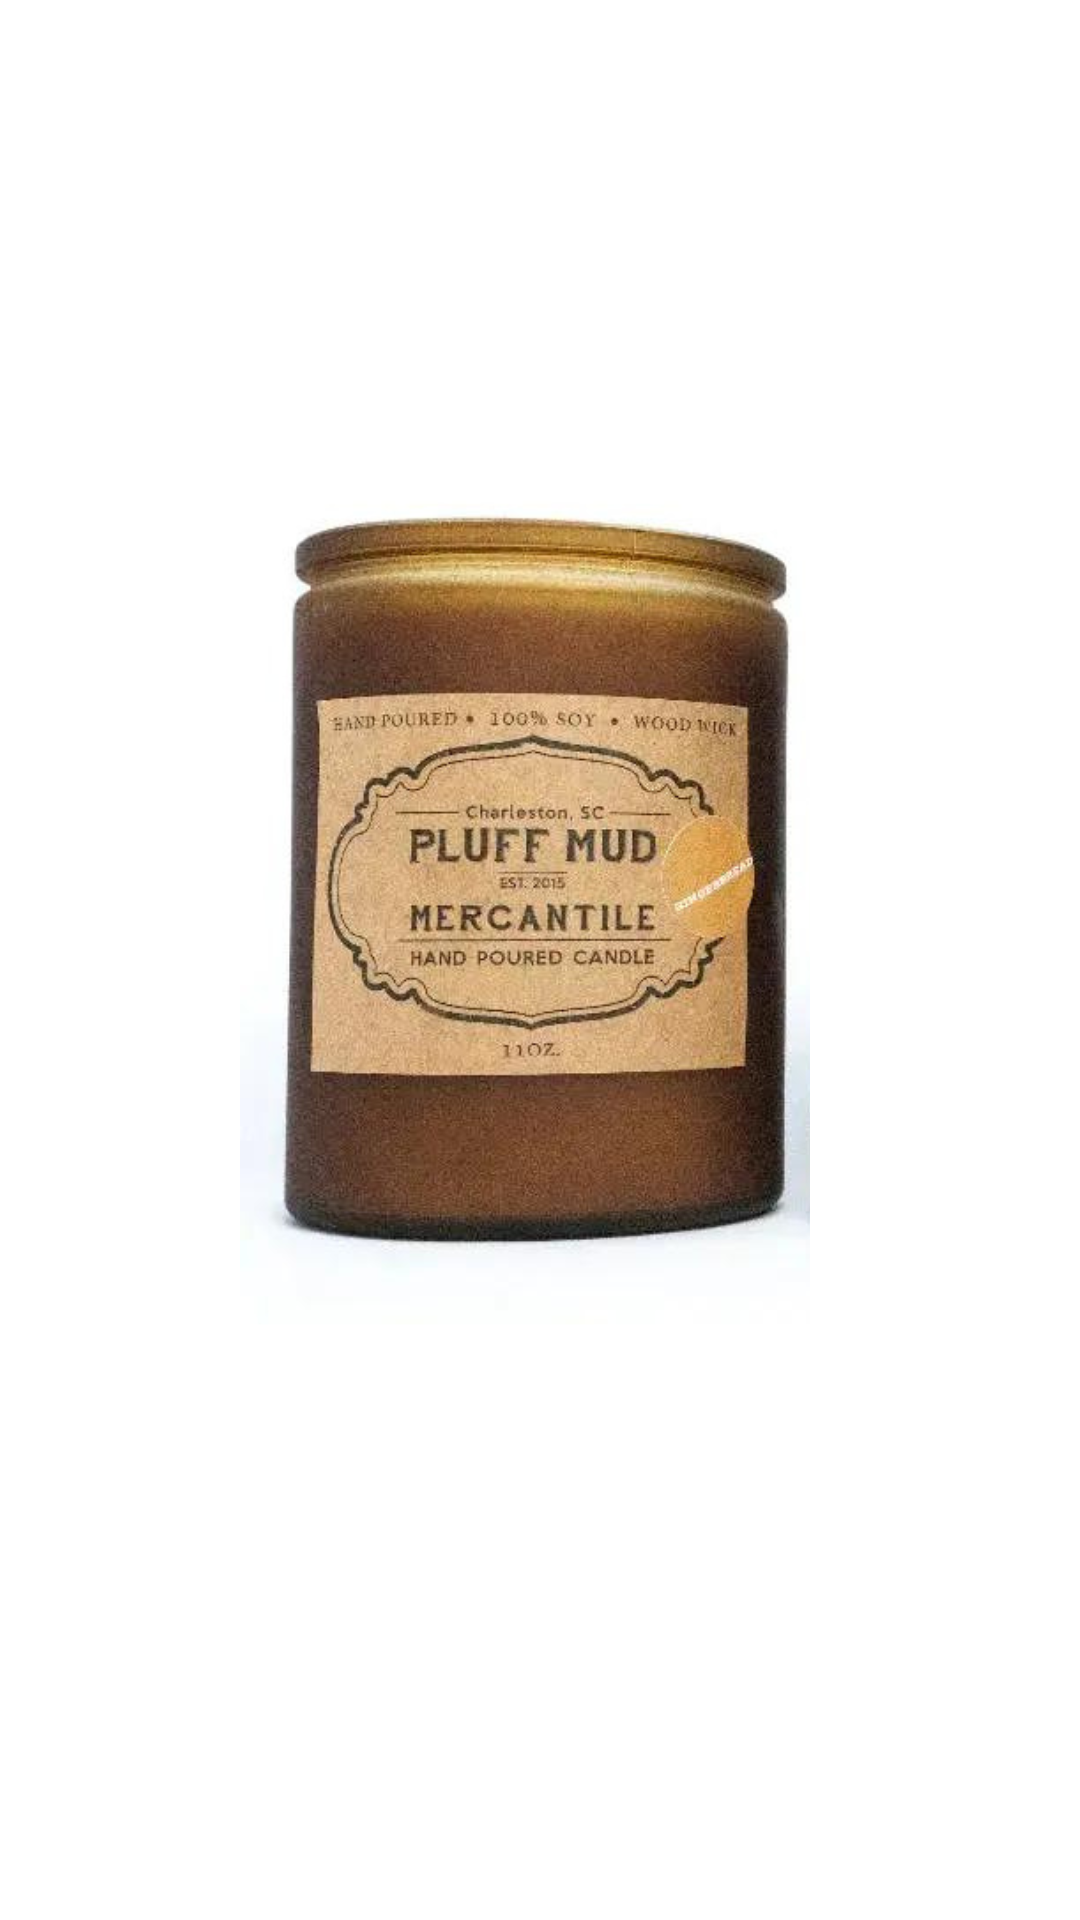 Toasted Pumpkin Hand Poured Soy Candle - Pluff Mud Mercantile